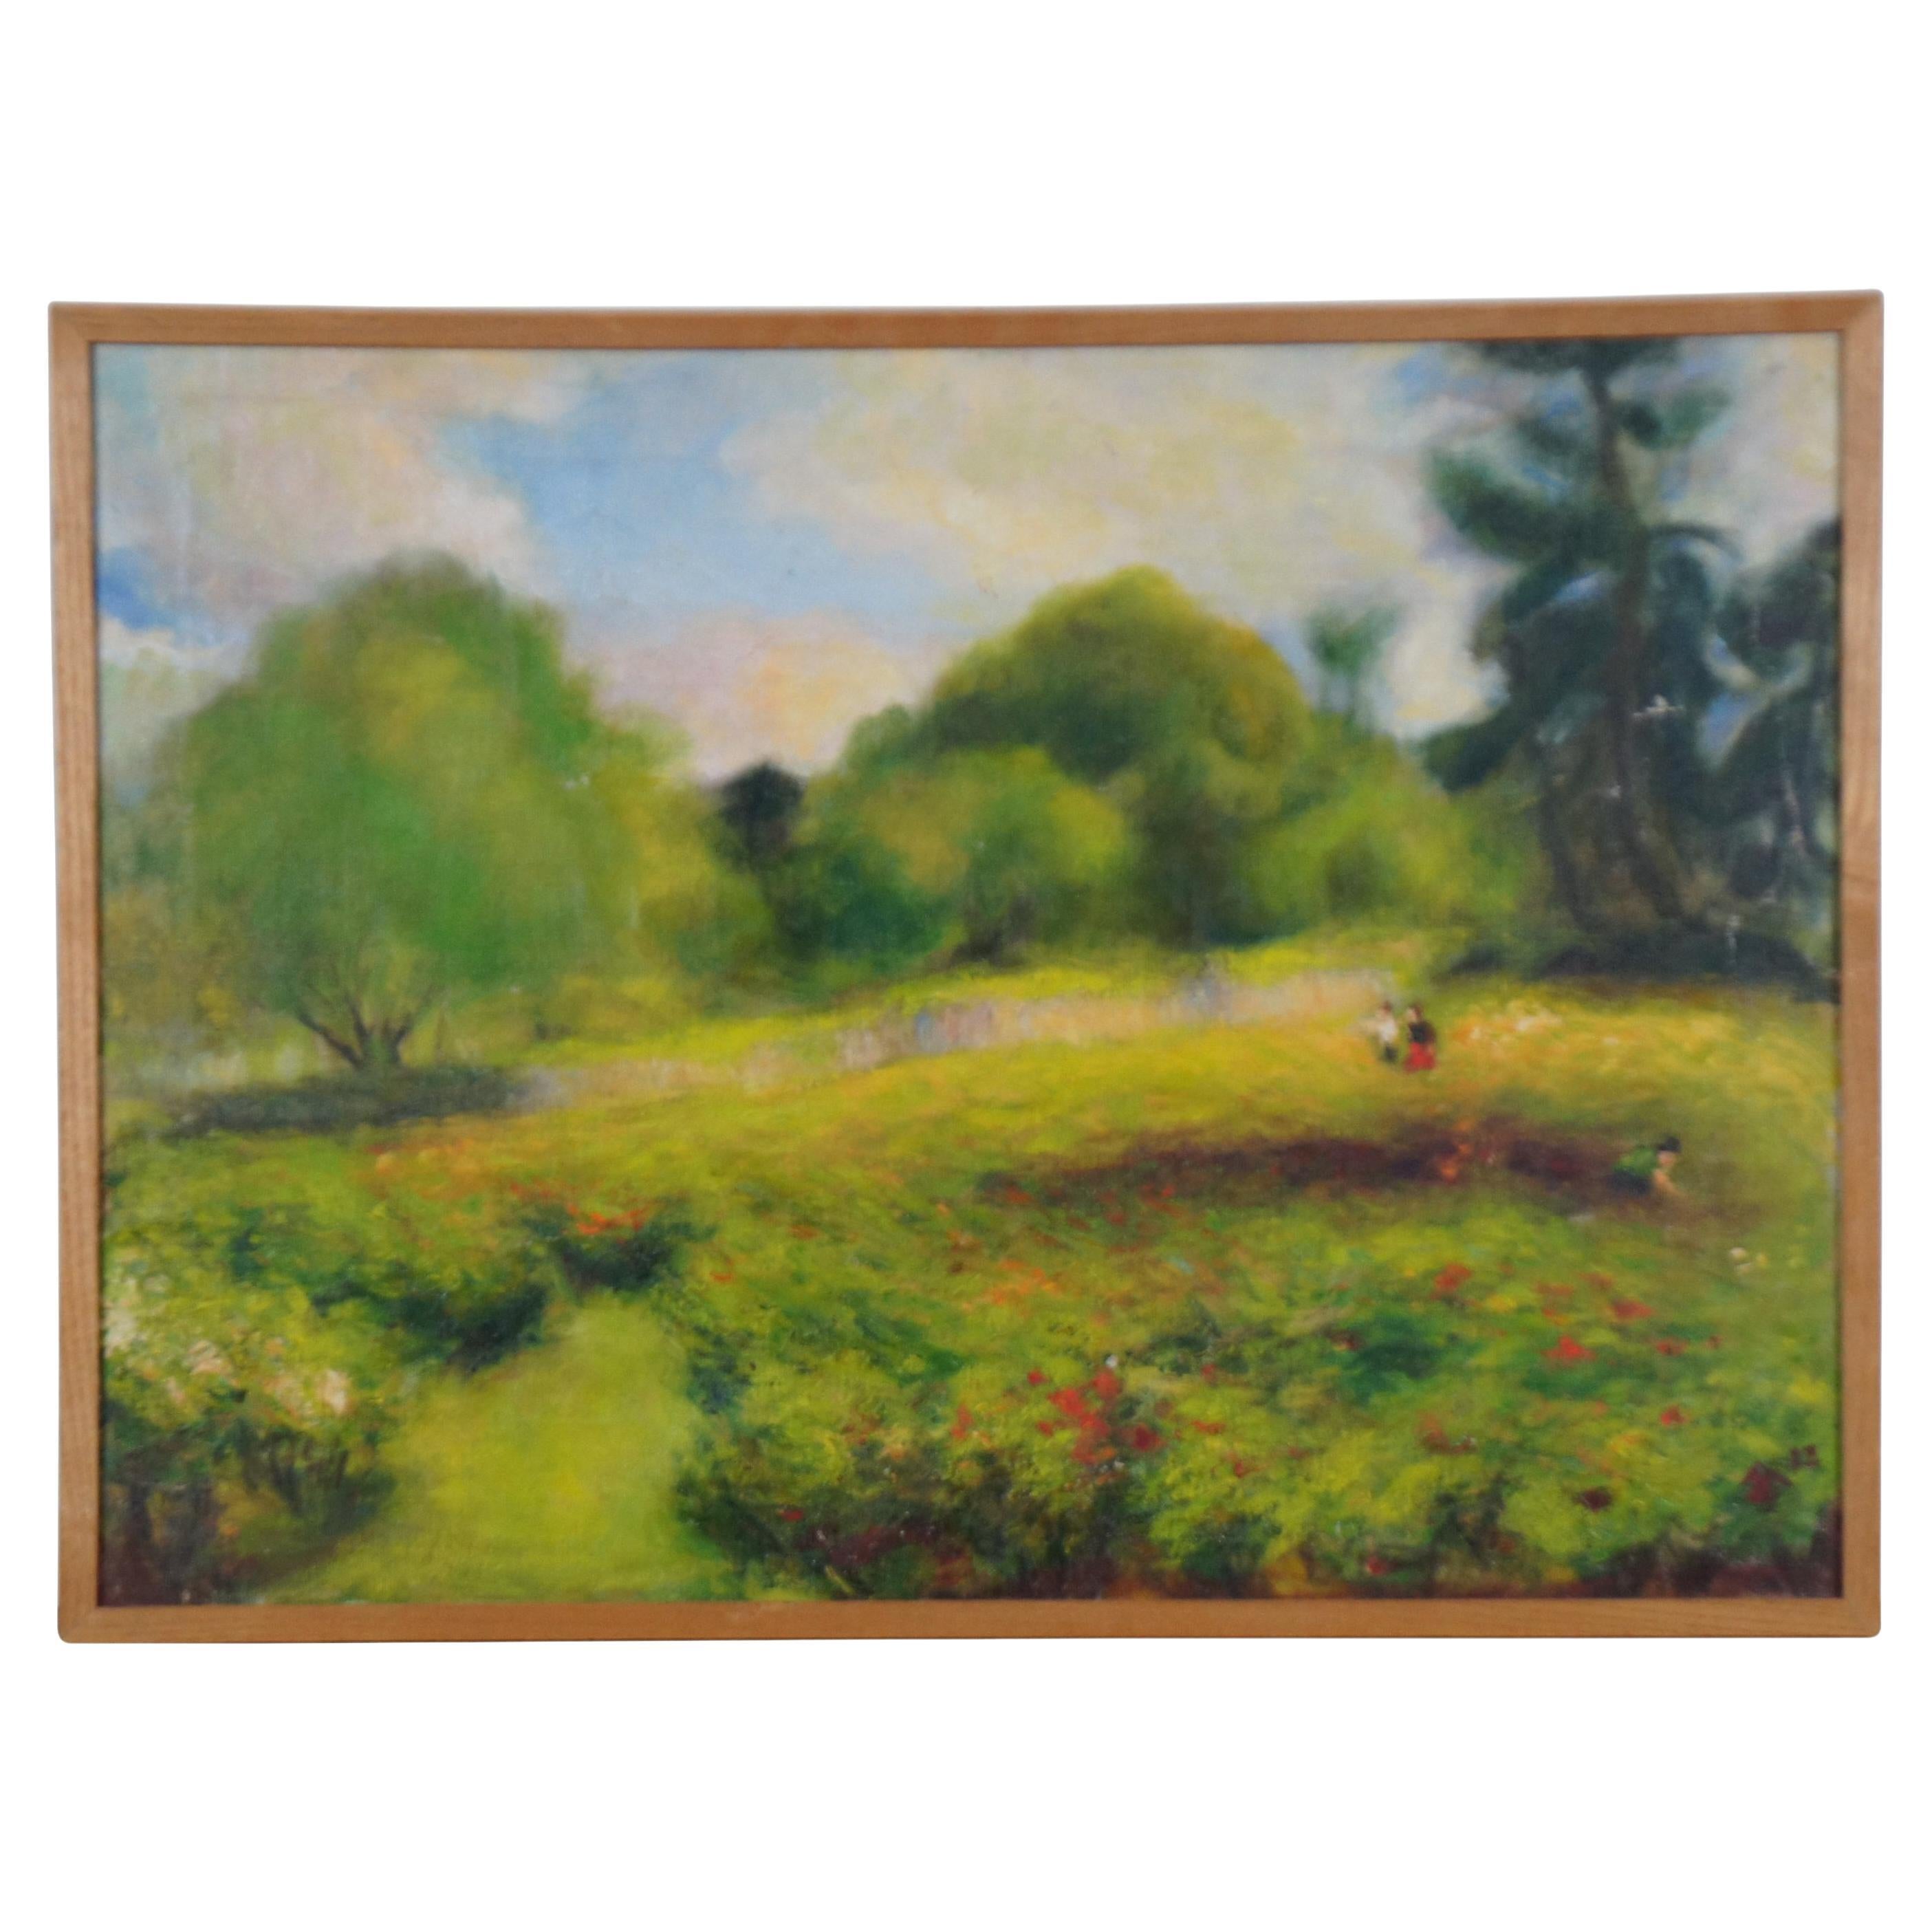 1982 Chun Hwa Hwang Impressionist Oil Landscape Painting on Canvas